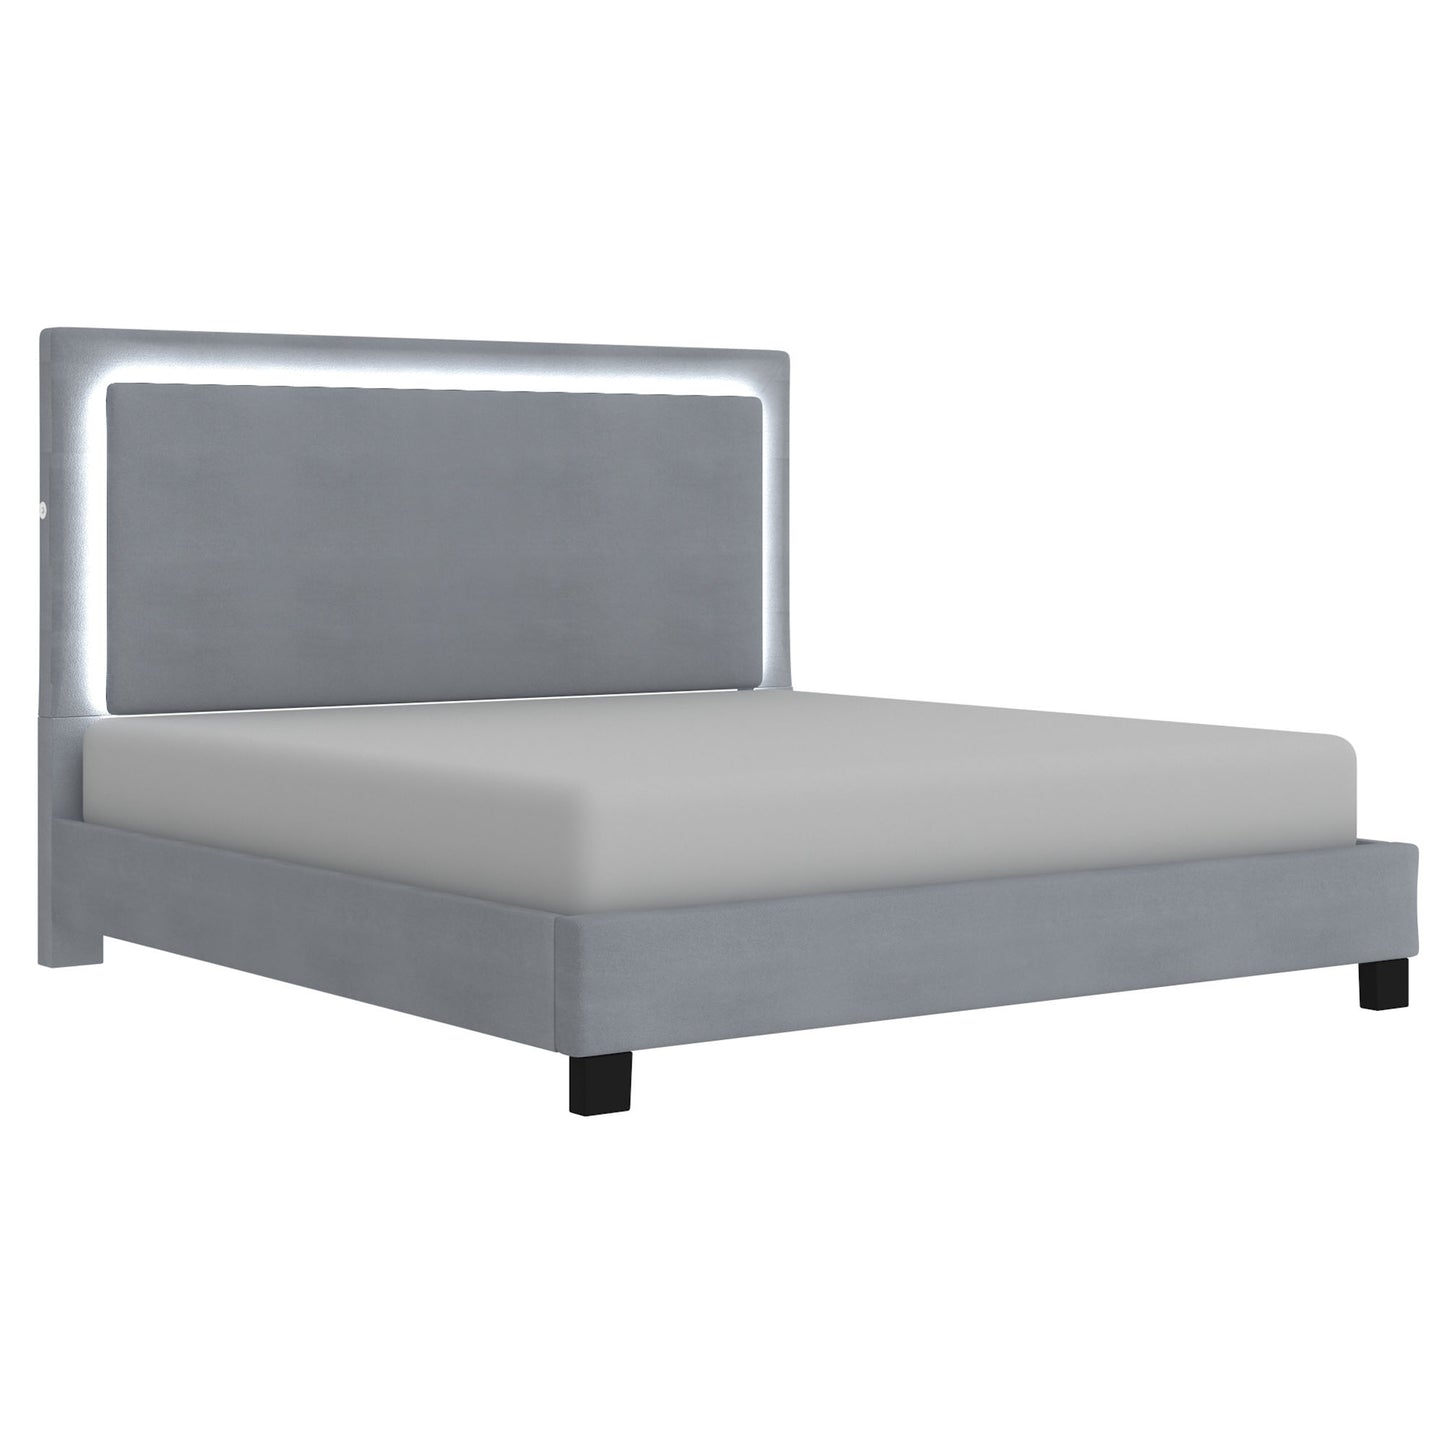 King Size- (Lumina Grey with light)-  Fabric- Bed frame- with slats